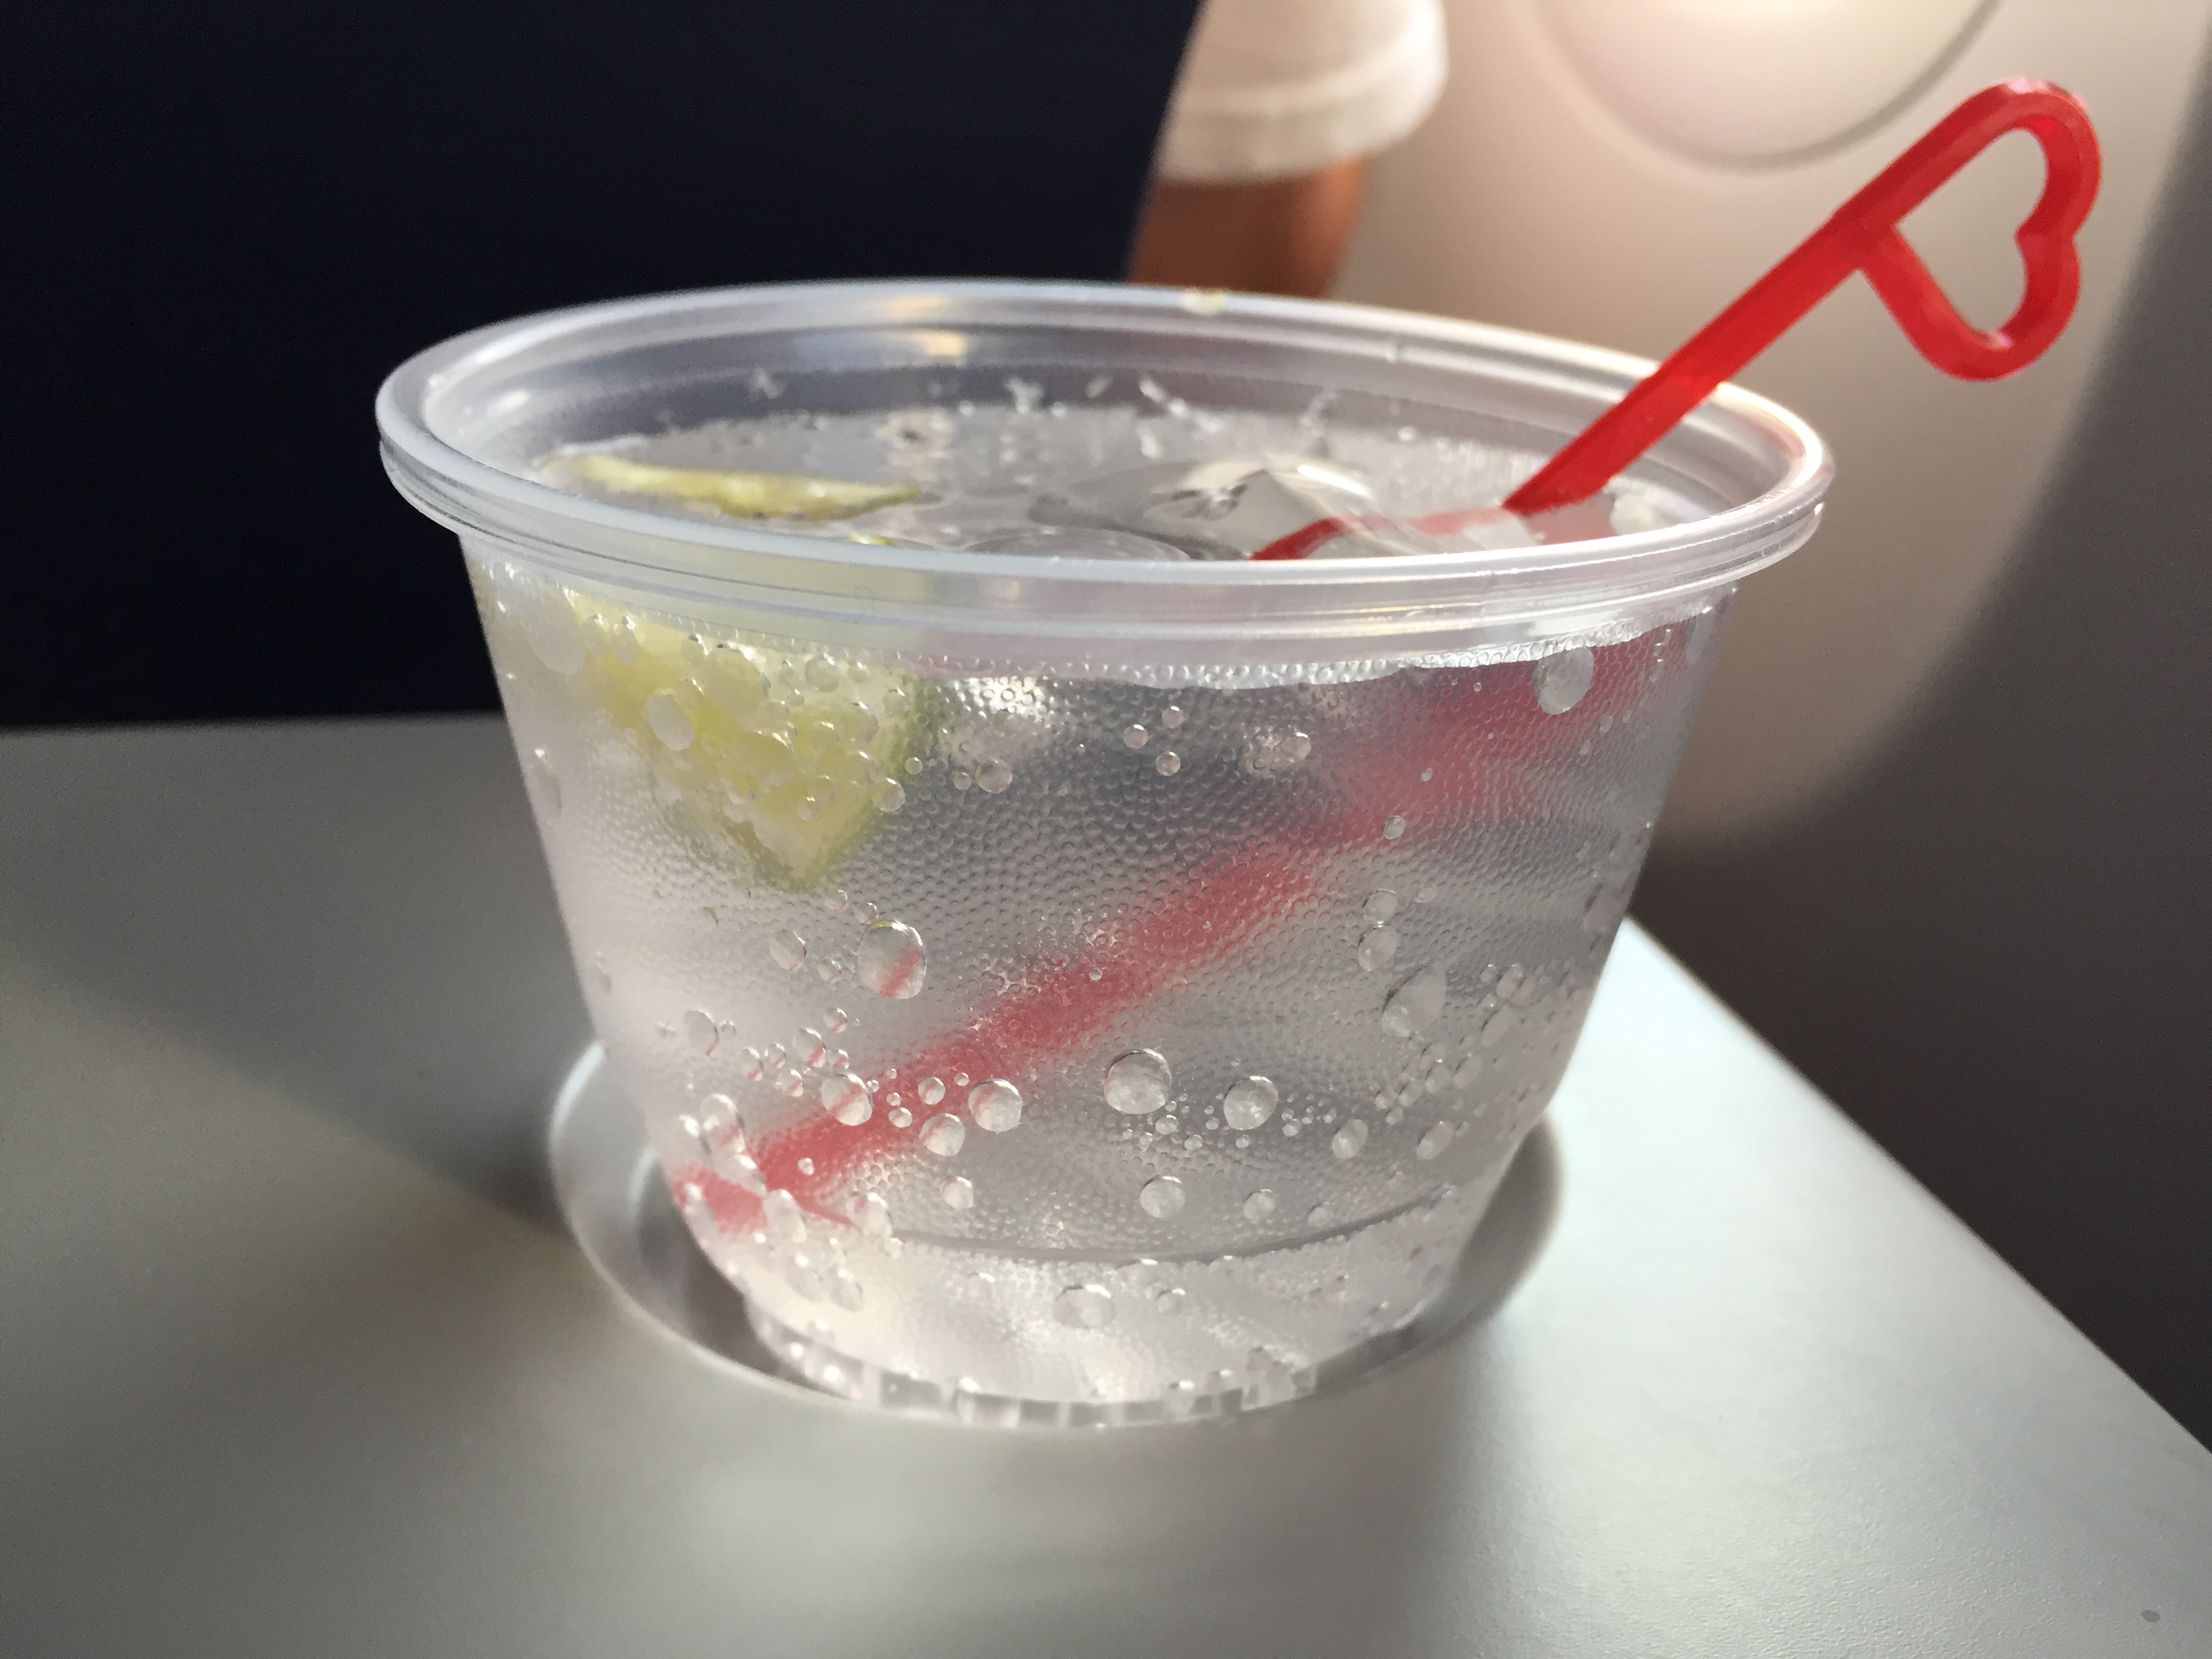 Southwest Airlines Aircraft Boeing 737 800 Economy Cabin Pre Arrival Drinks Services Sparkling Water